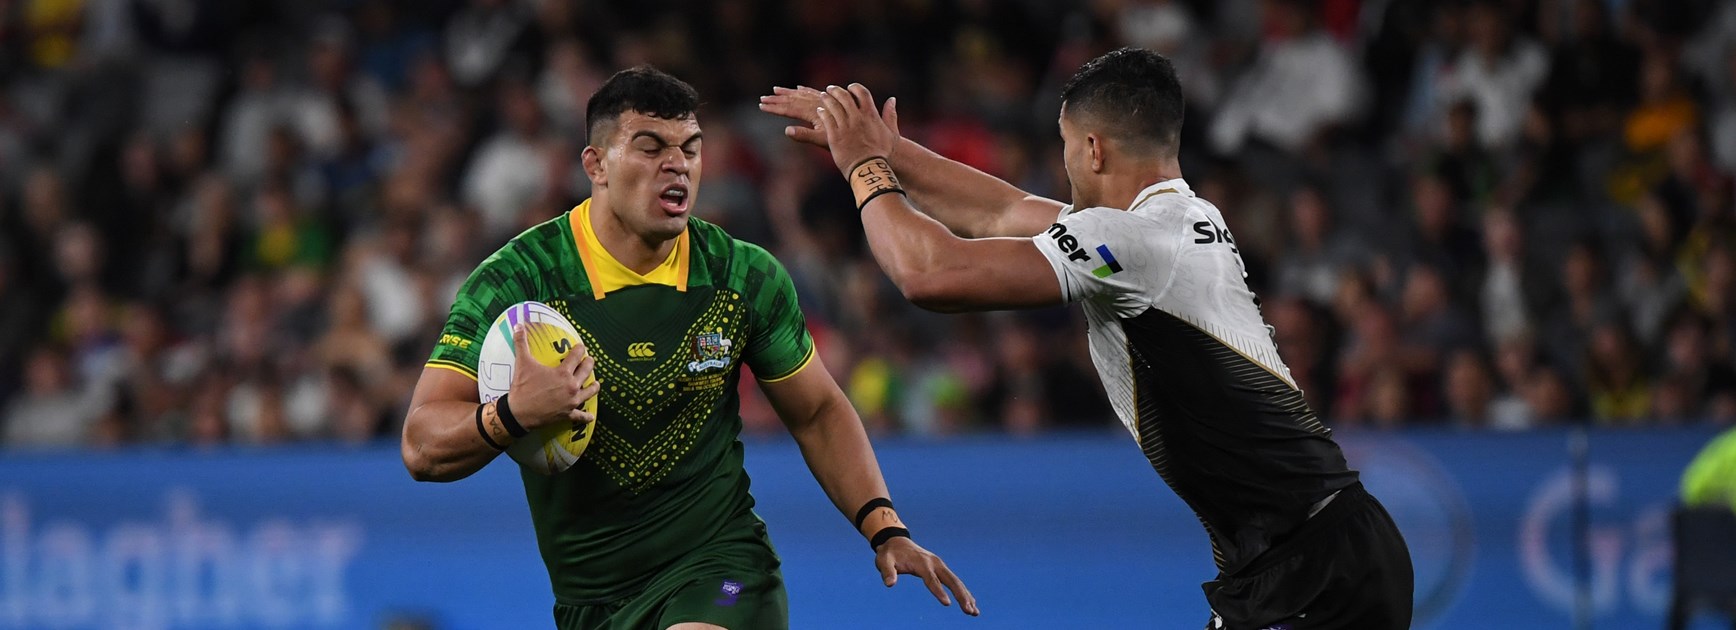 David Fifita on the charge for Australia at the World 9s.